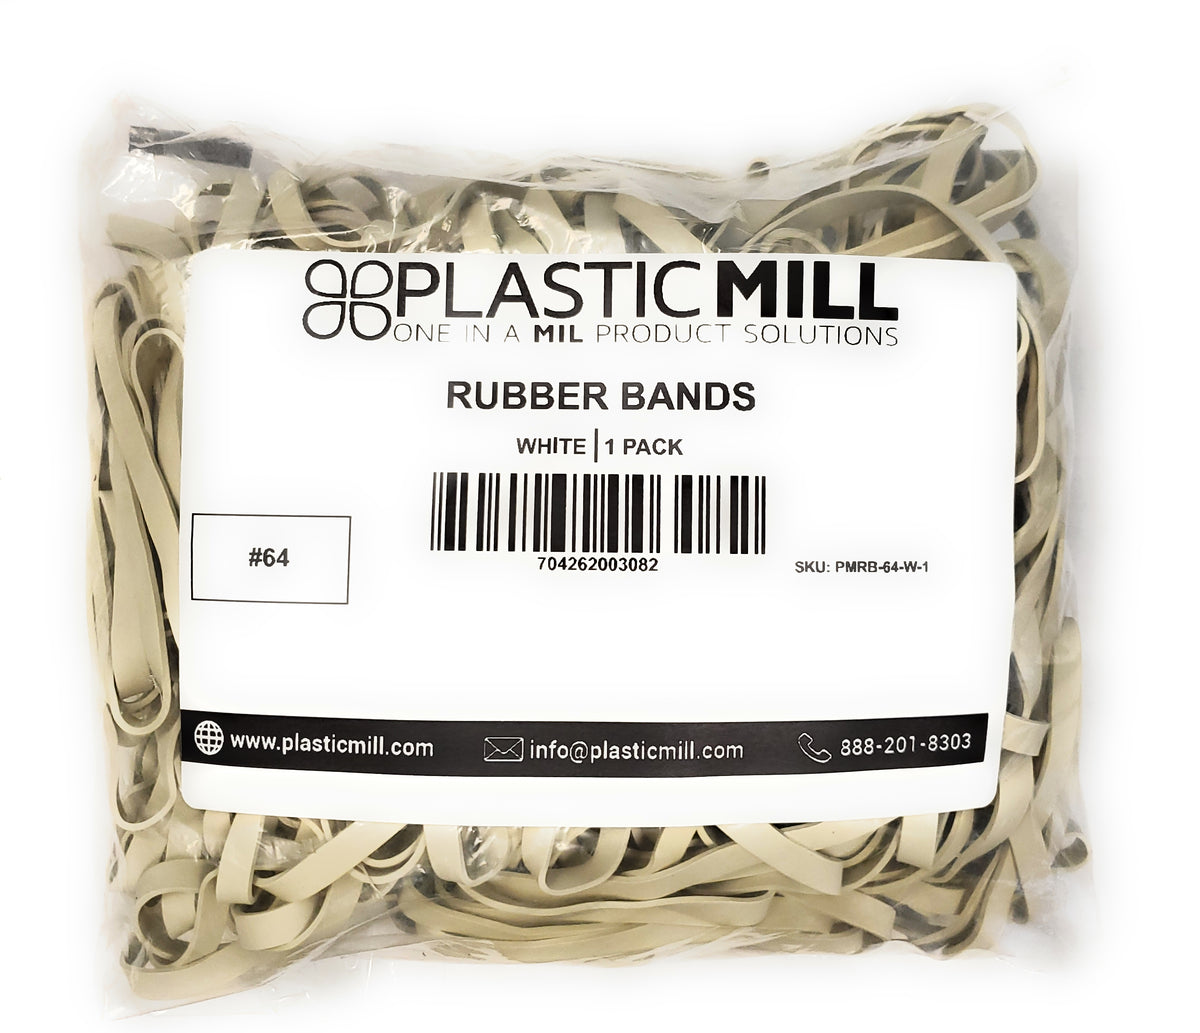 Size 64 White Rubber Bands - 250 count